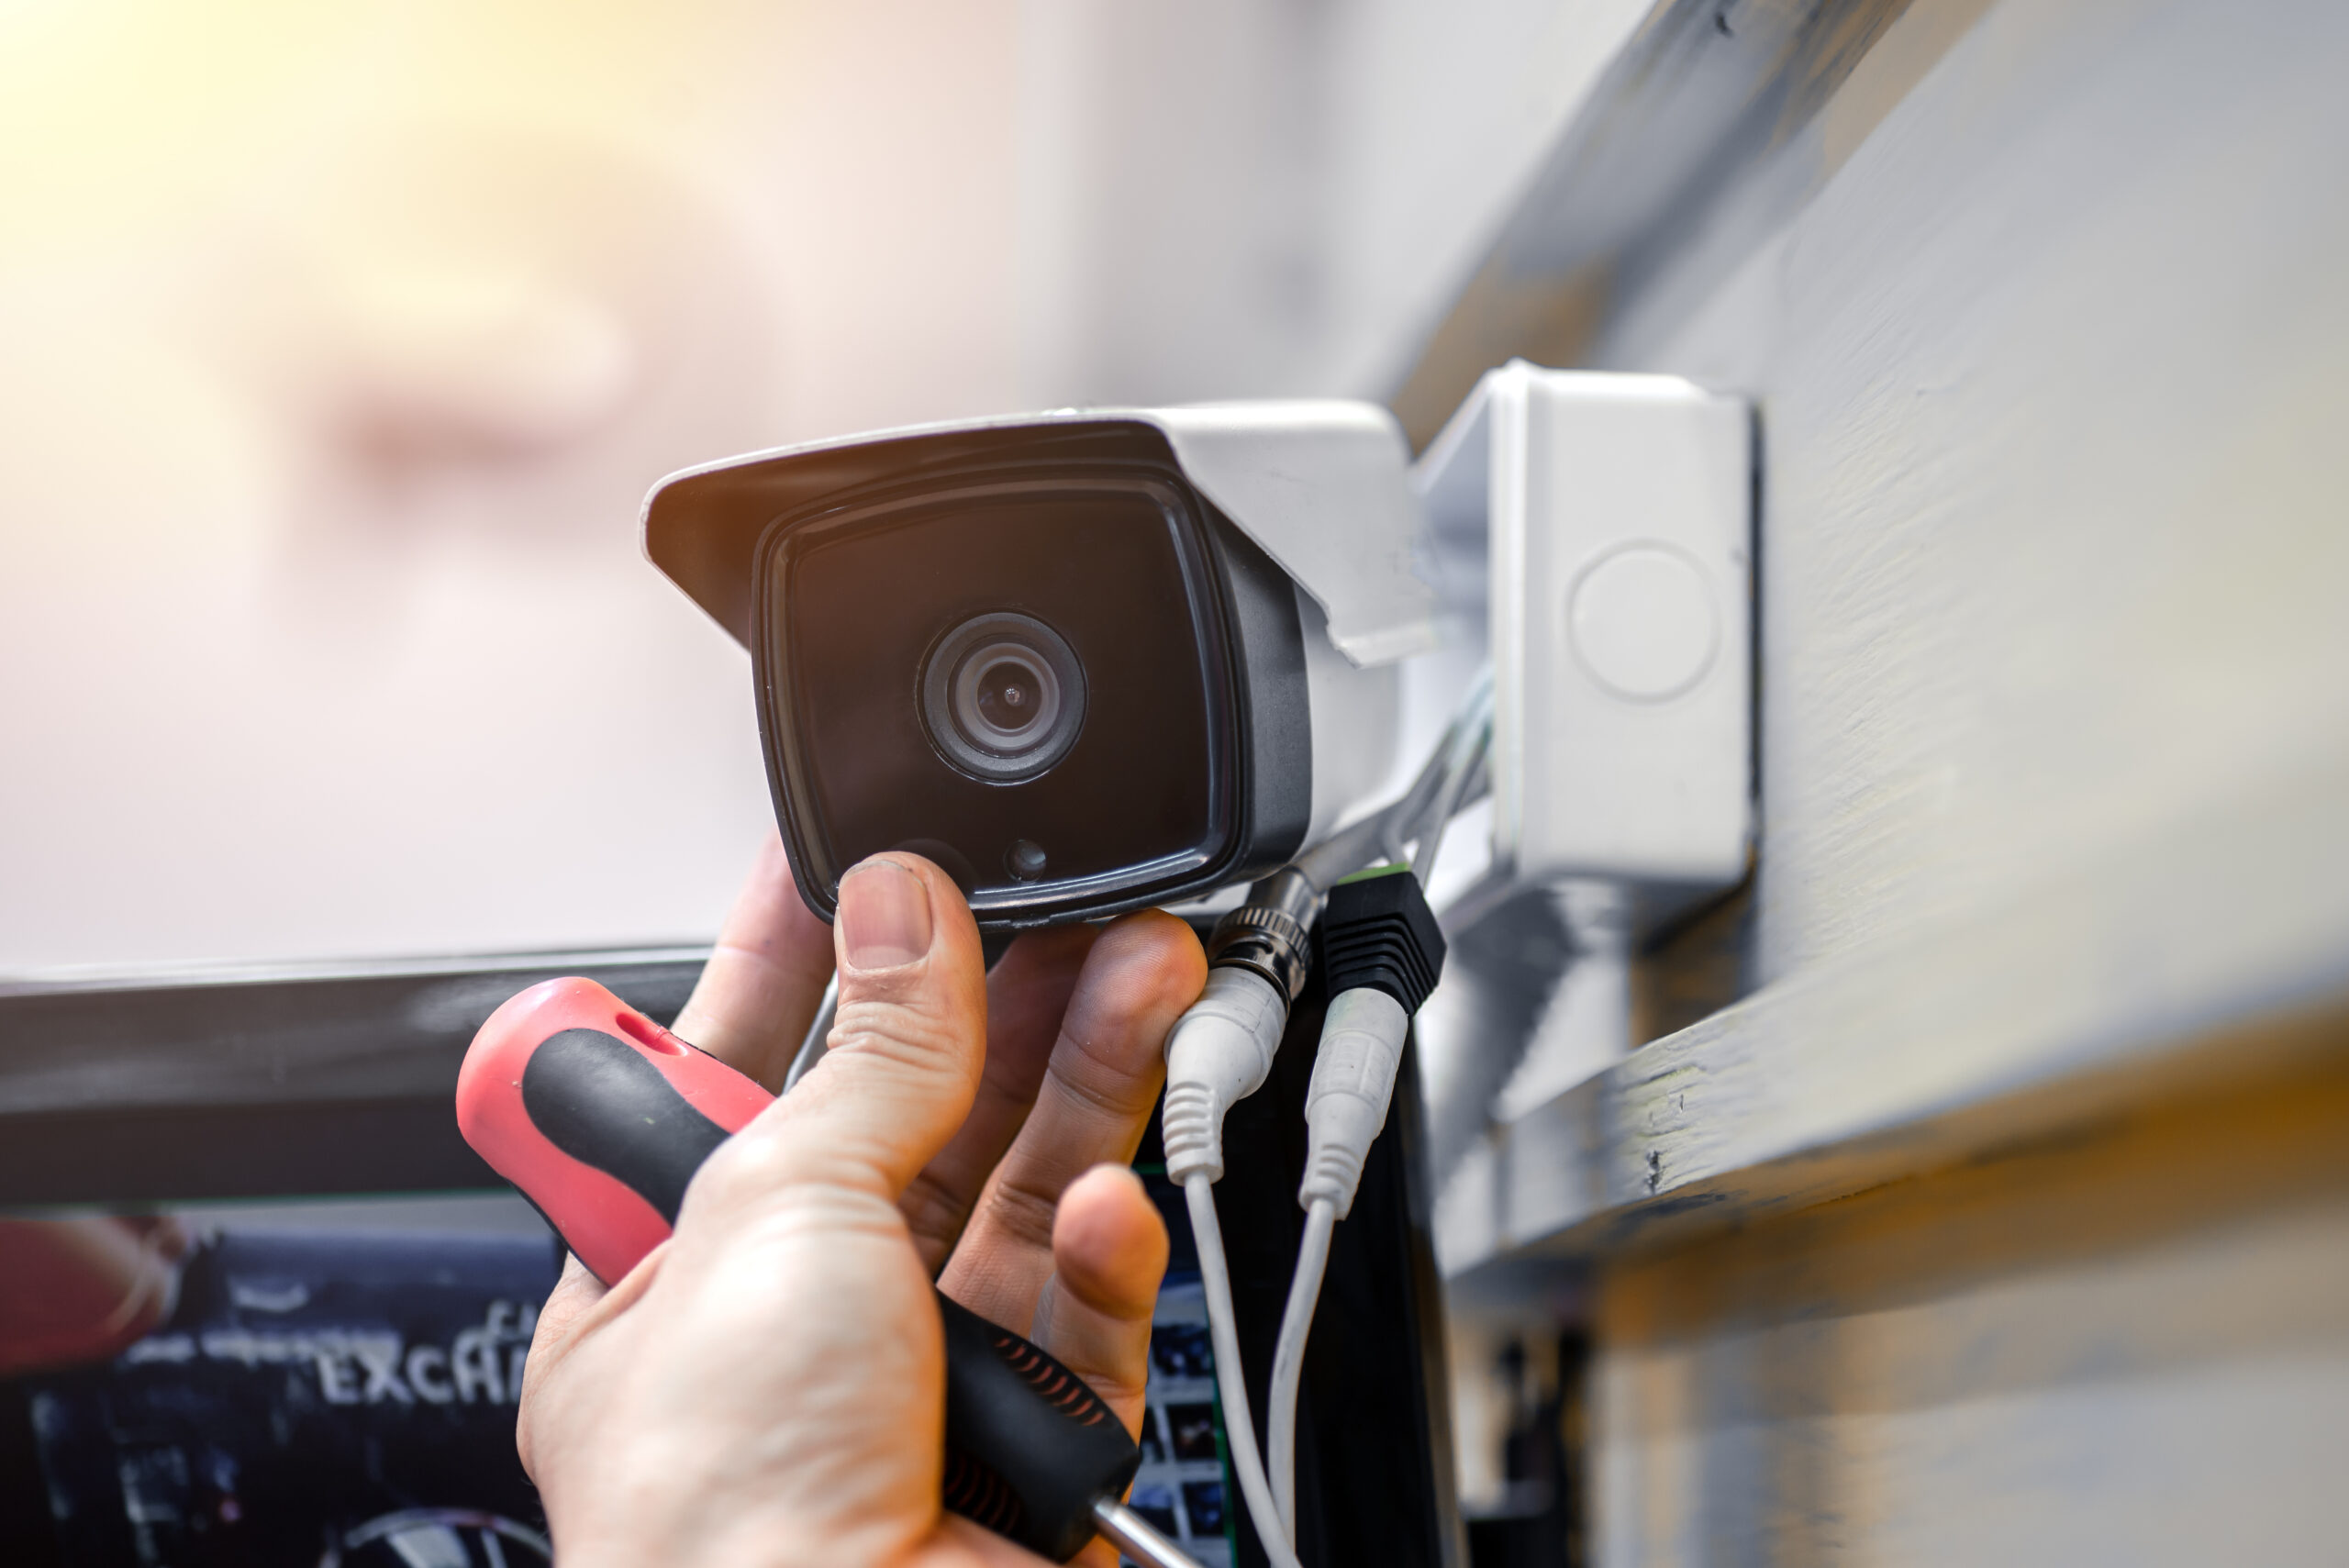 Get The Best Cctv Installation For Home Safety